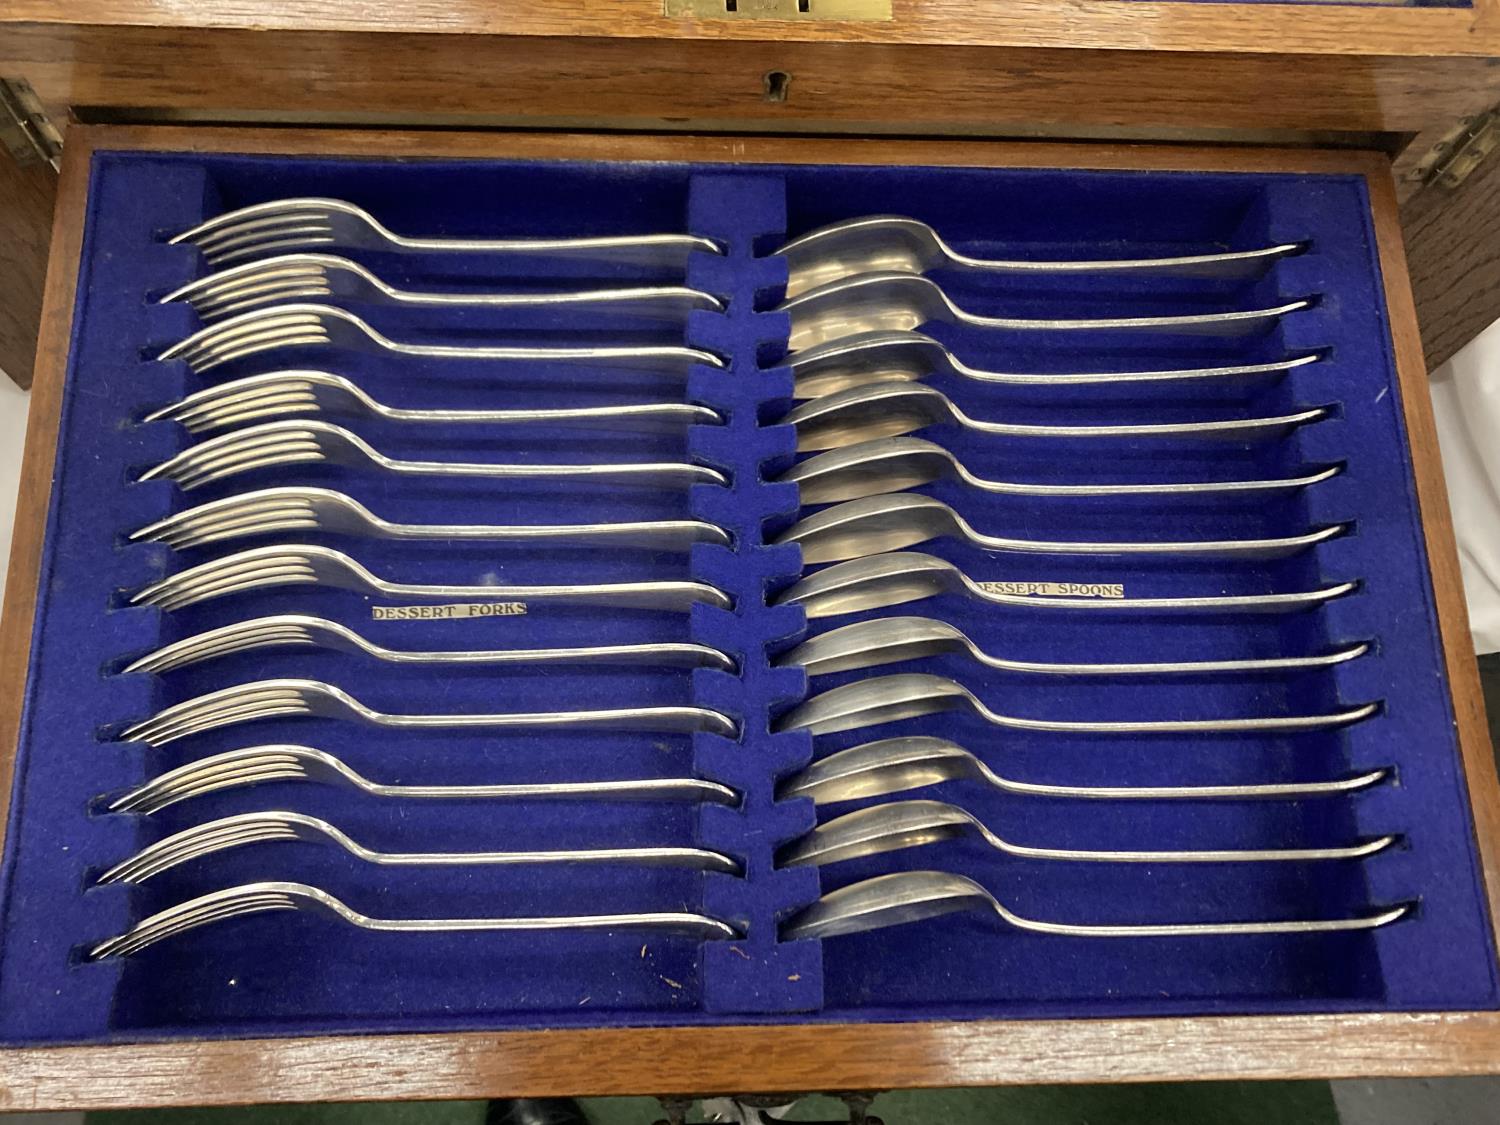 A CASED CANTEEN OF CUTLERY WITH LIFT UP TOP CONTAINING KNIVES, FORKS AND CARVING EQUIPMENT, A DRAWER - Image 3 of 5